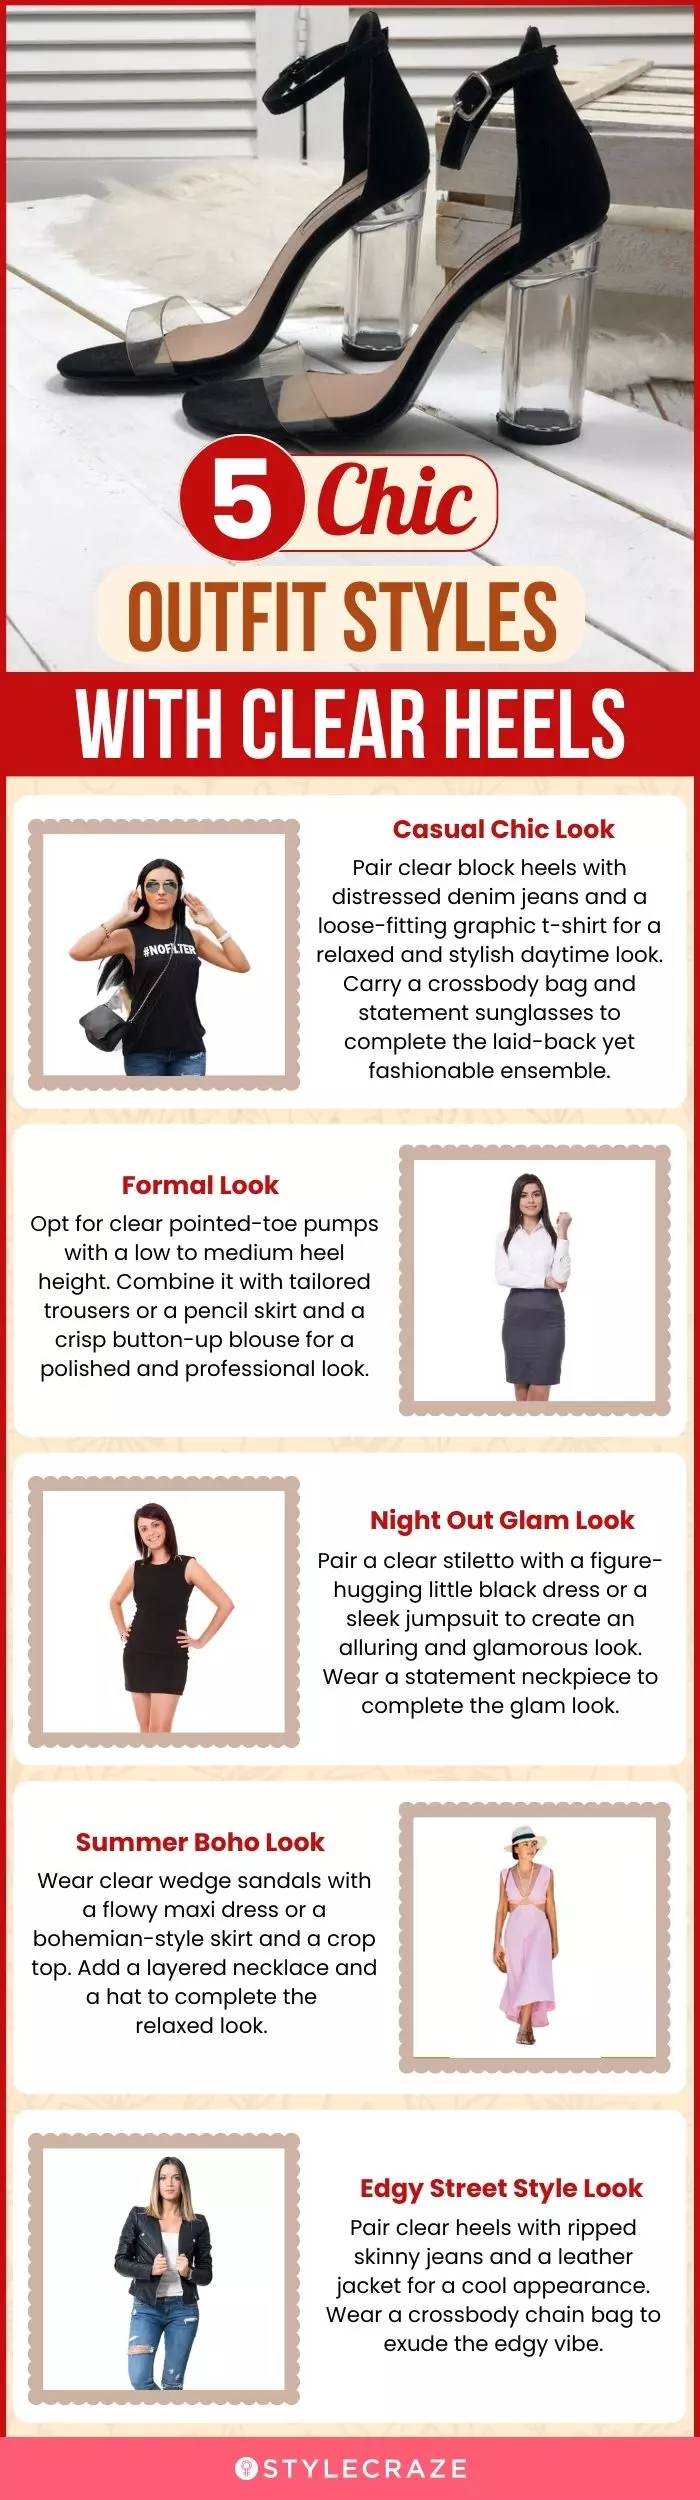 5 Chic Outfit Styles With Clear Heels (infographic)